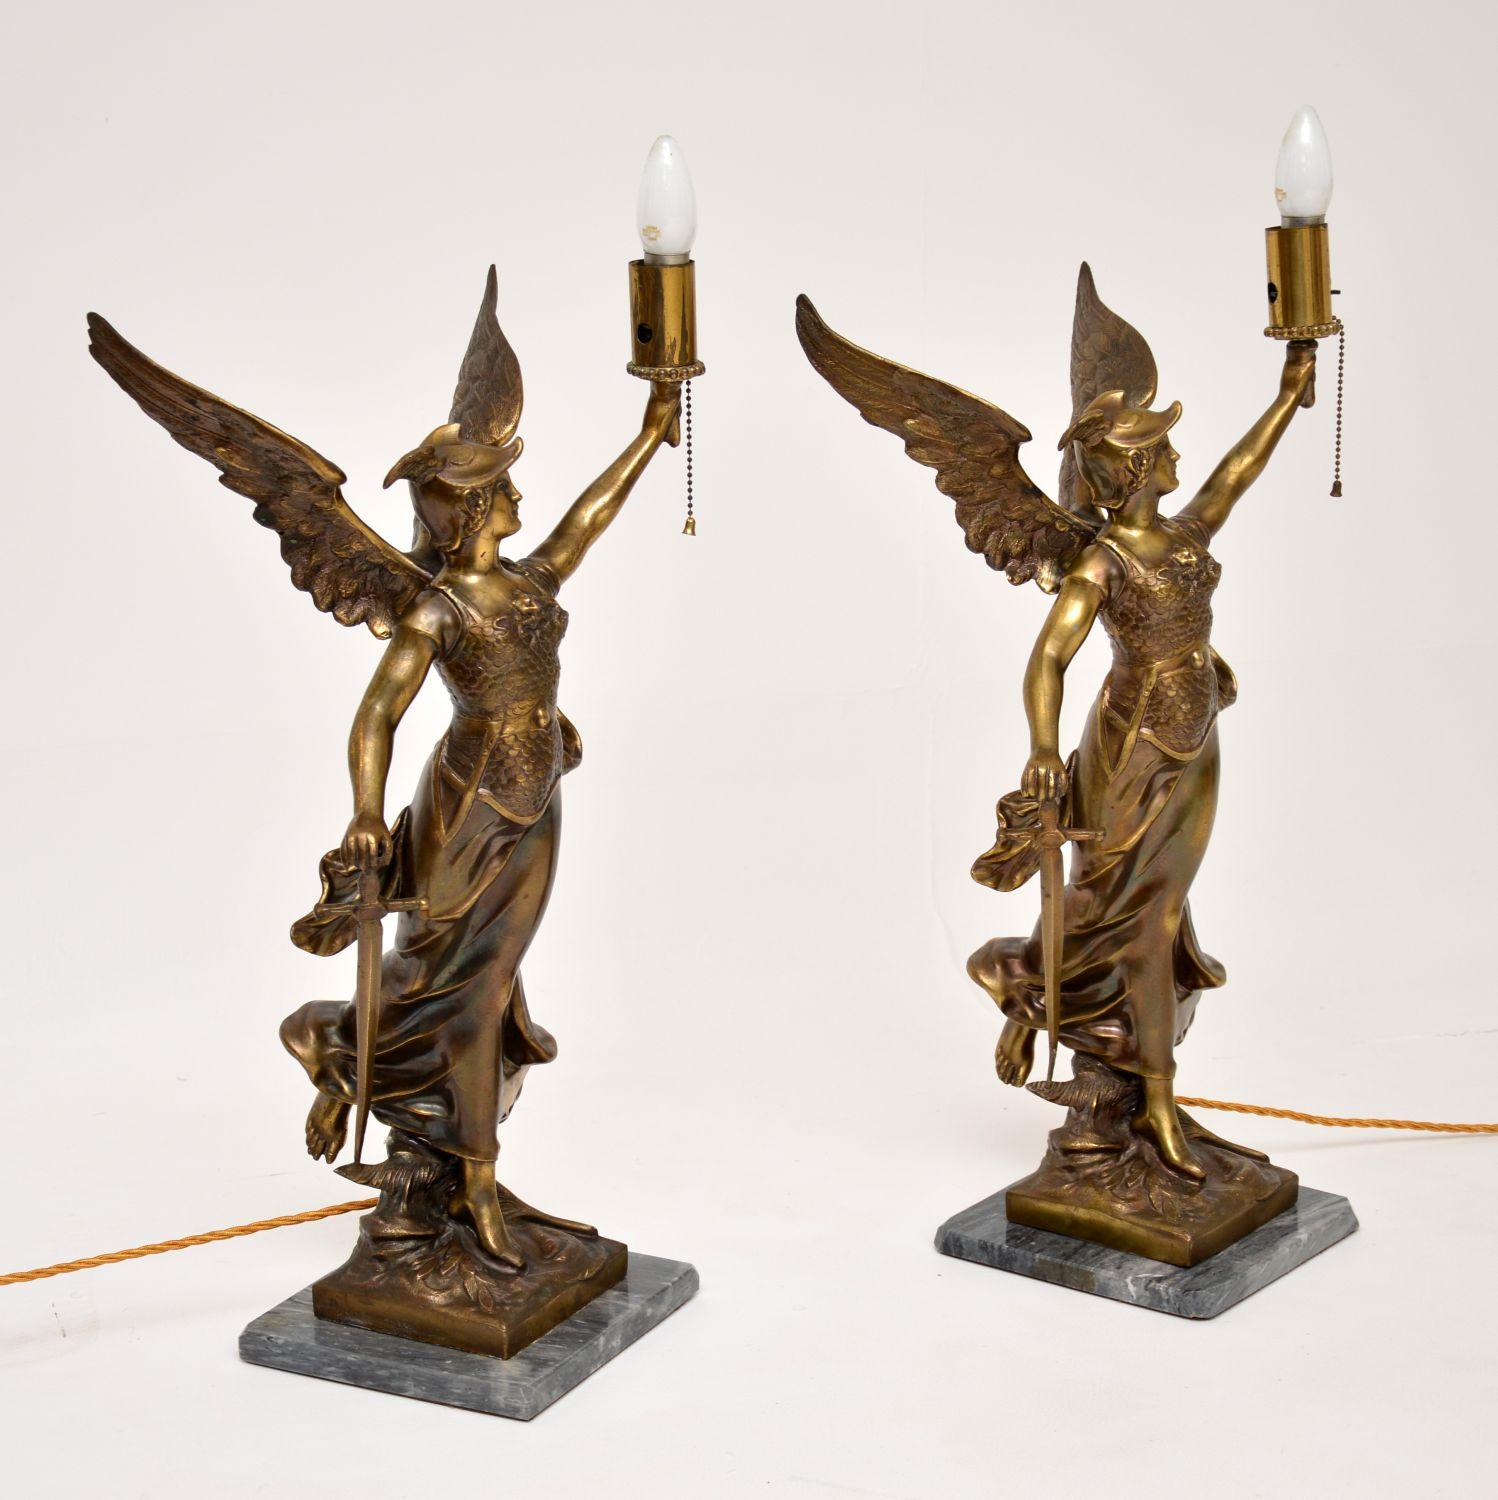 20th Century Pair of Large Antique Brass & Marble Table Lamps Depicting Greek Goddess Athena